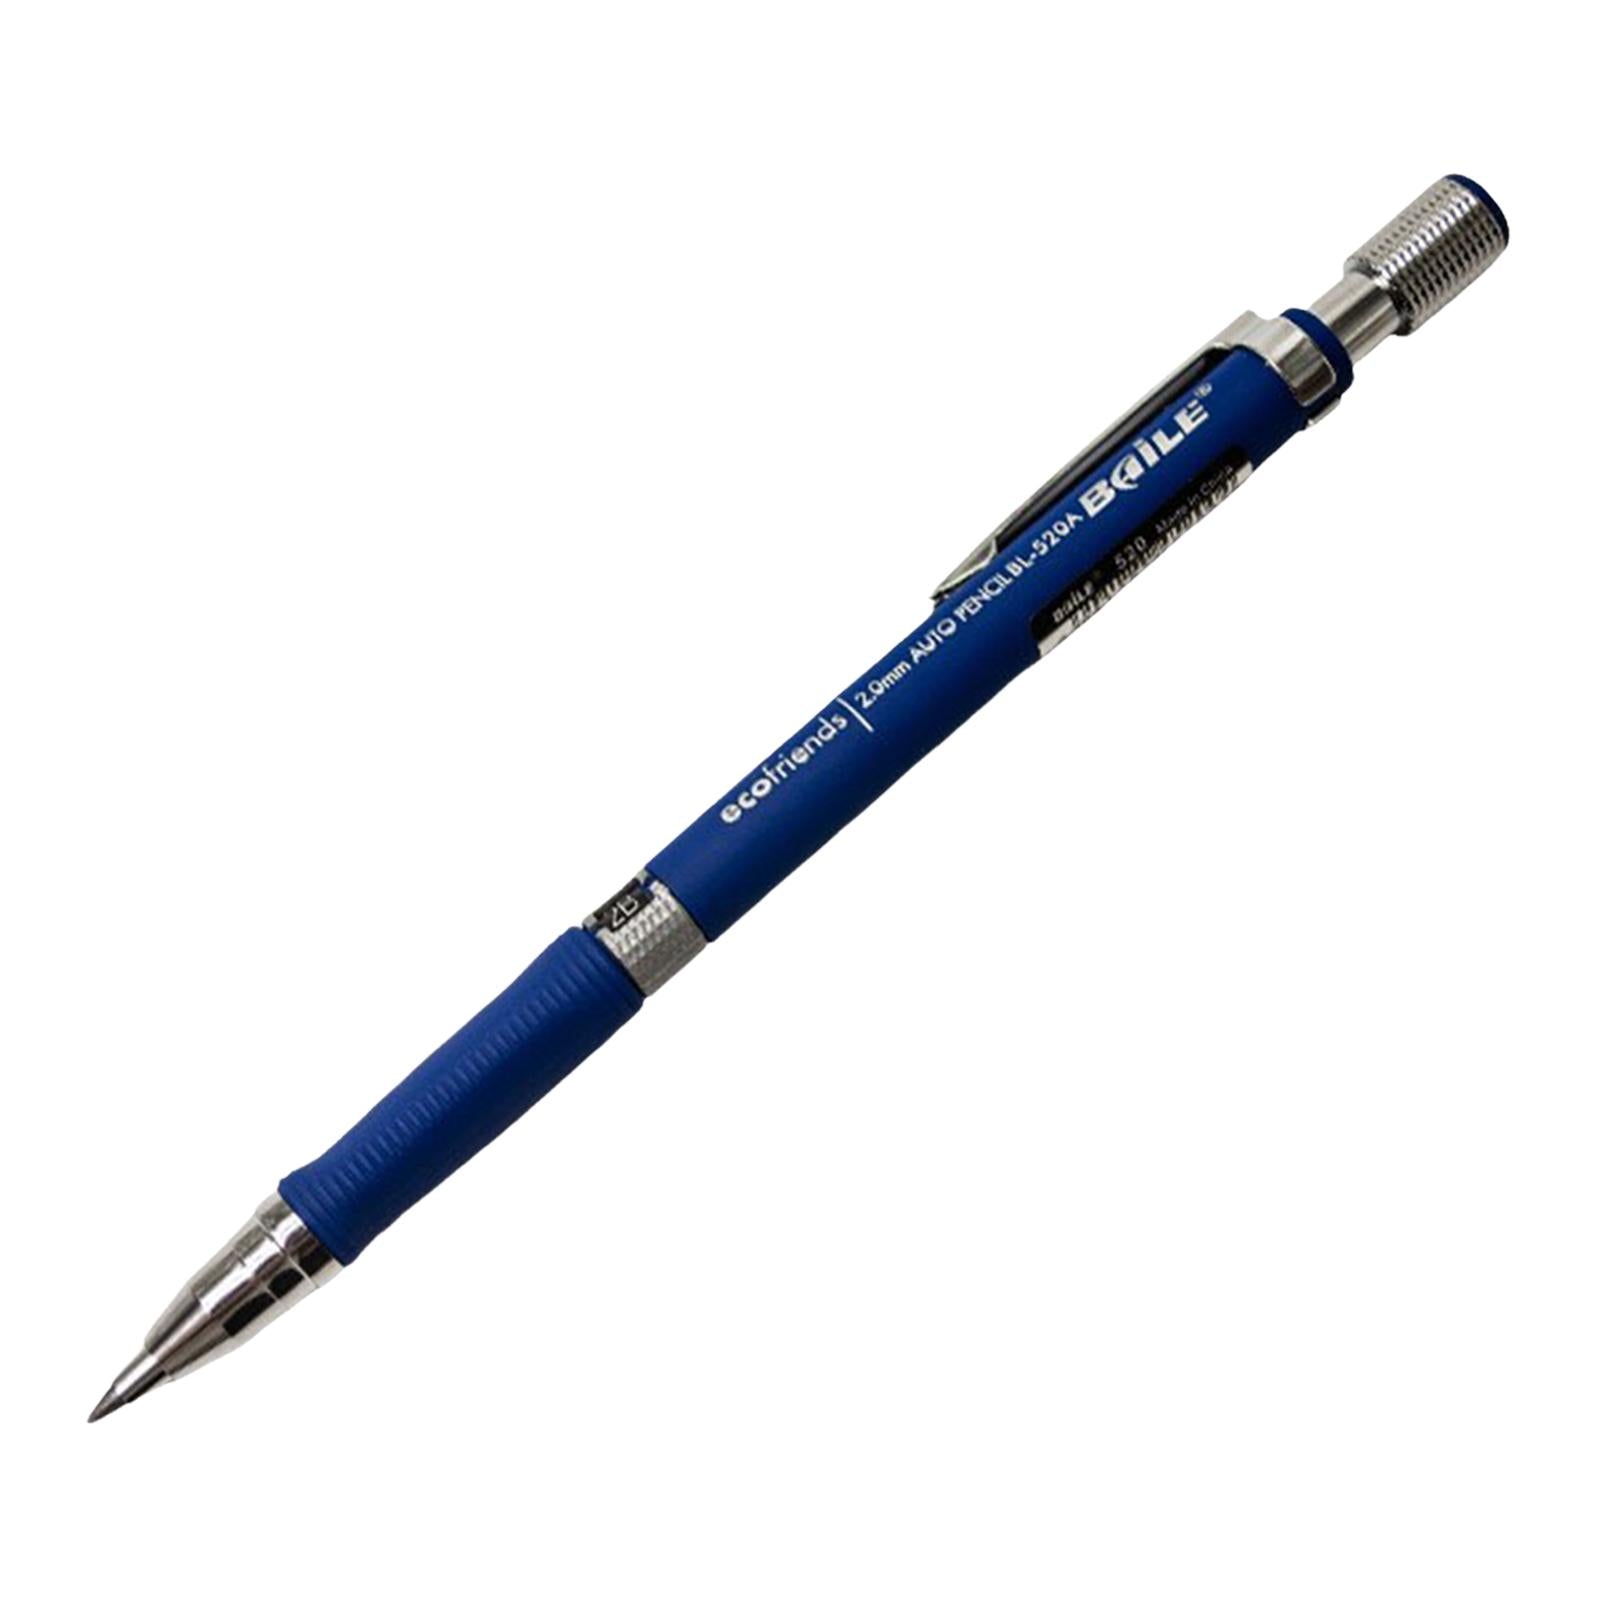 Art Painting Pencils Portable Drafting Pencil for Drafting Writing Sketching Blue